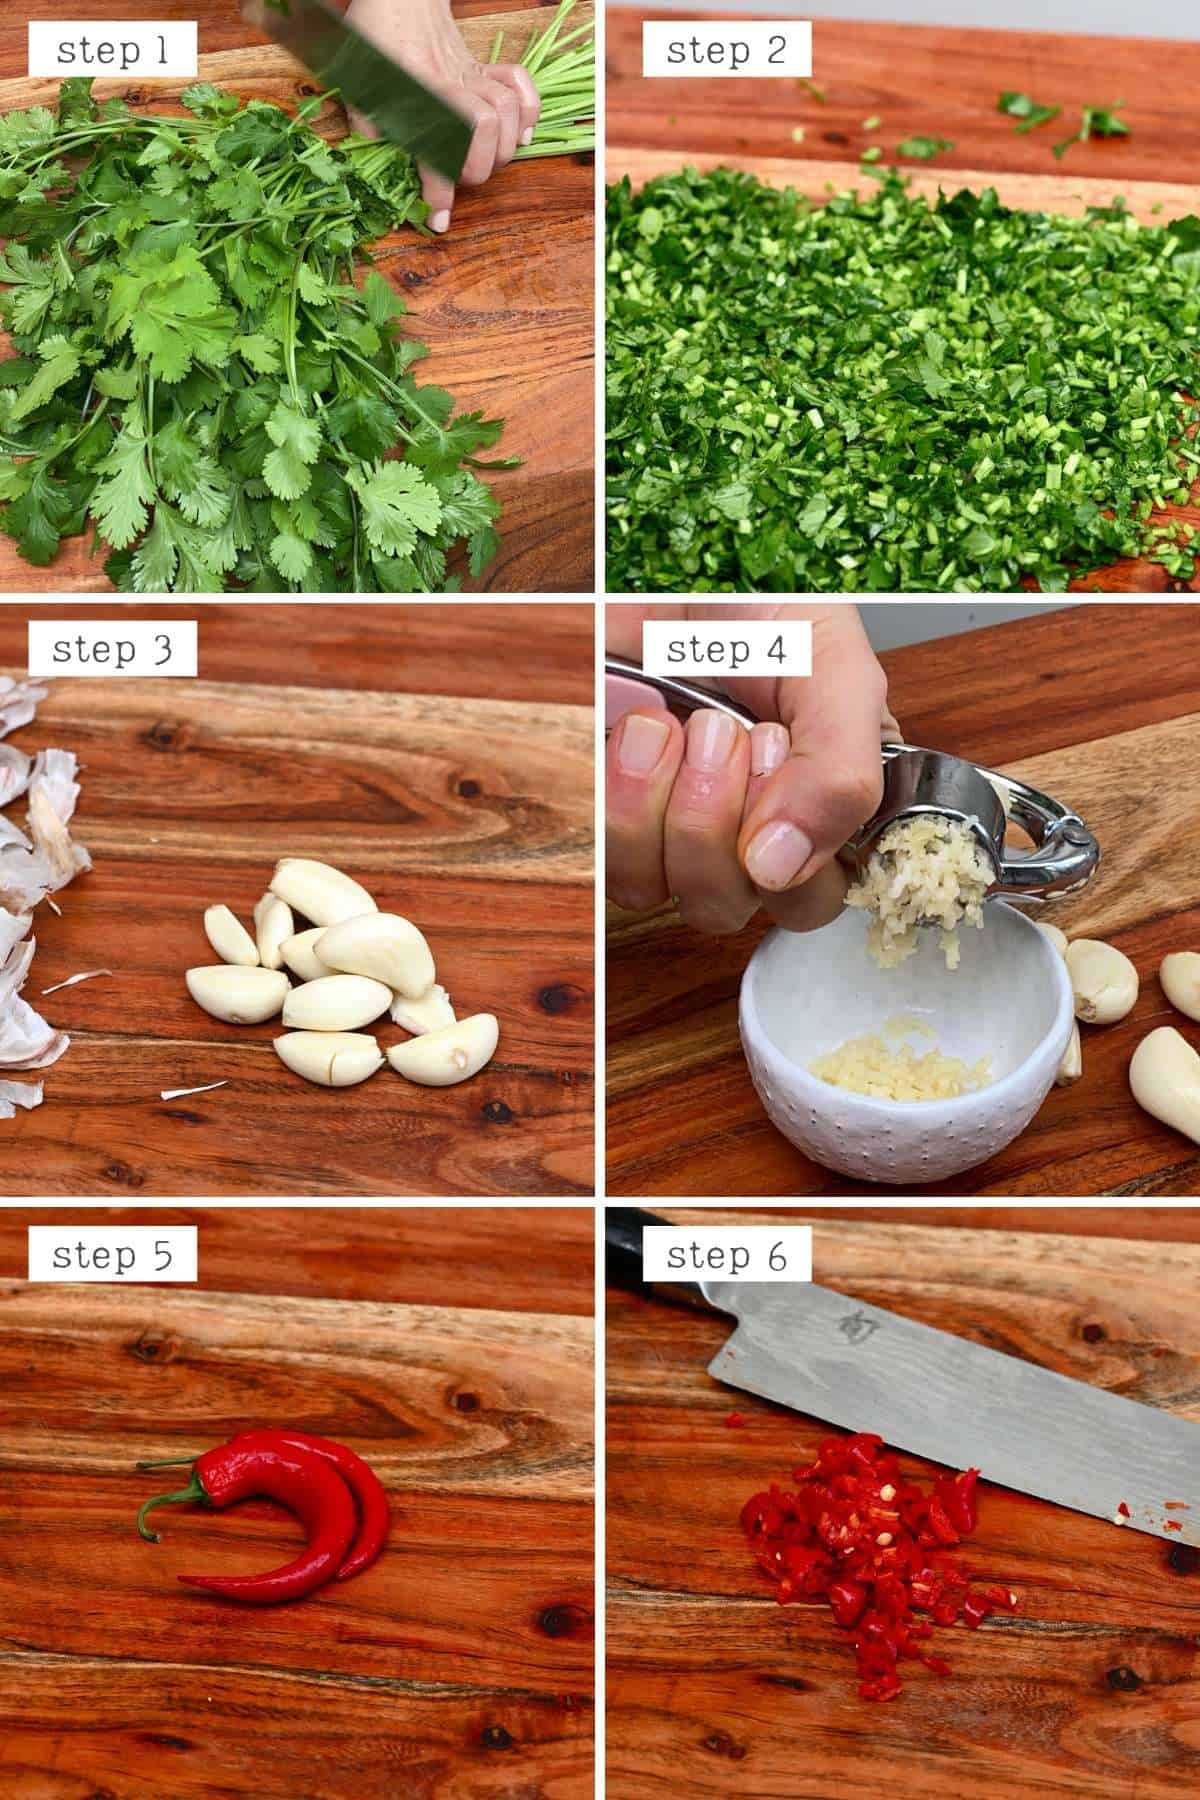 Steps for chopping ingredients